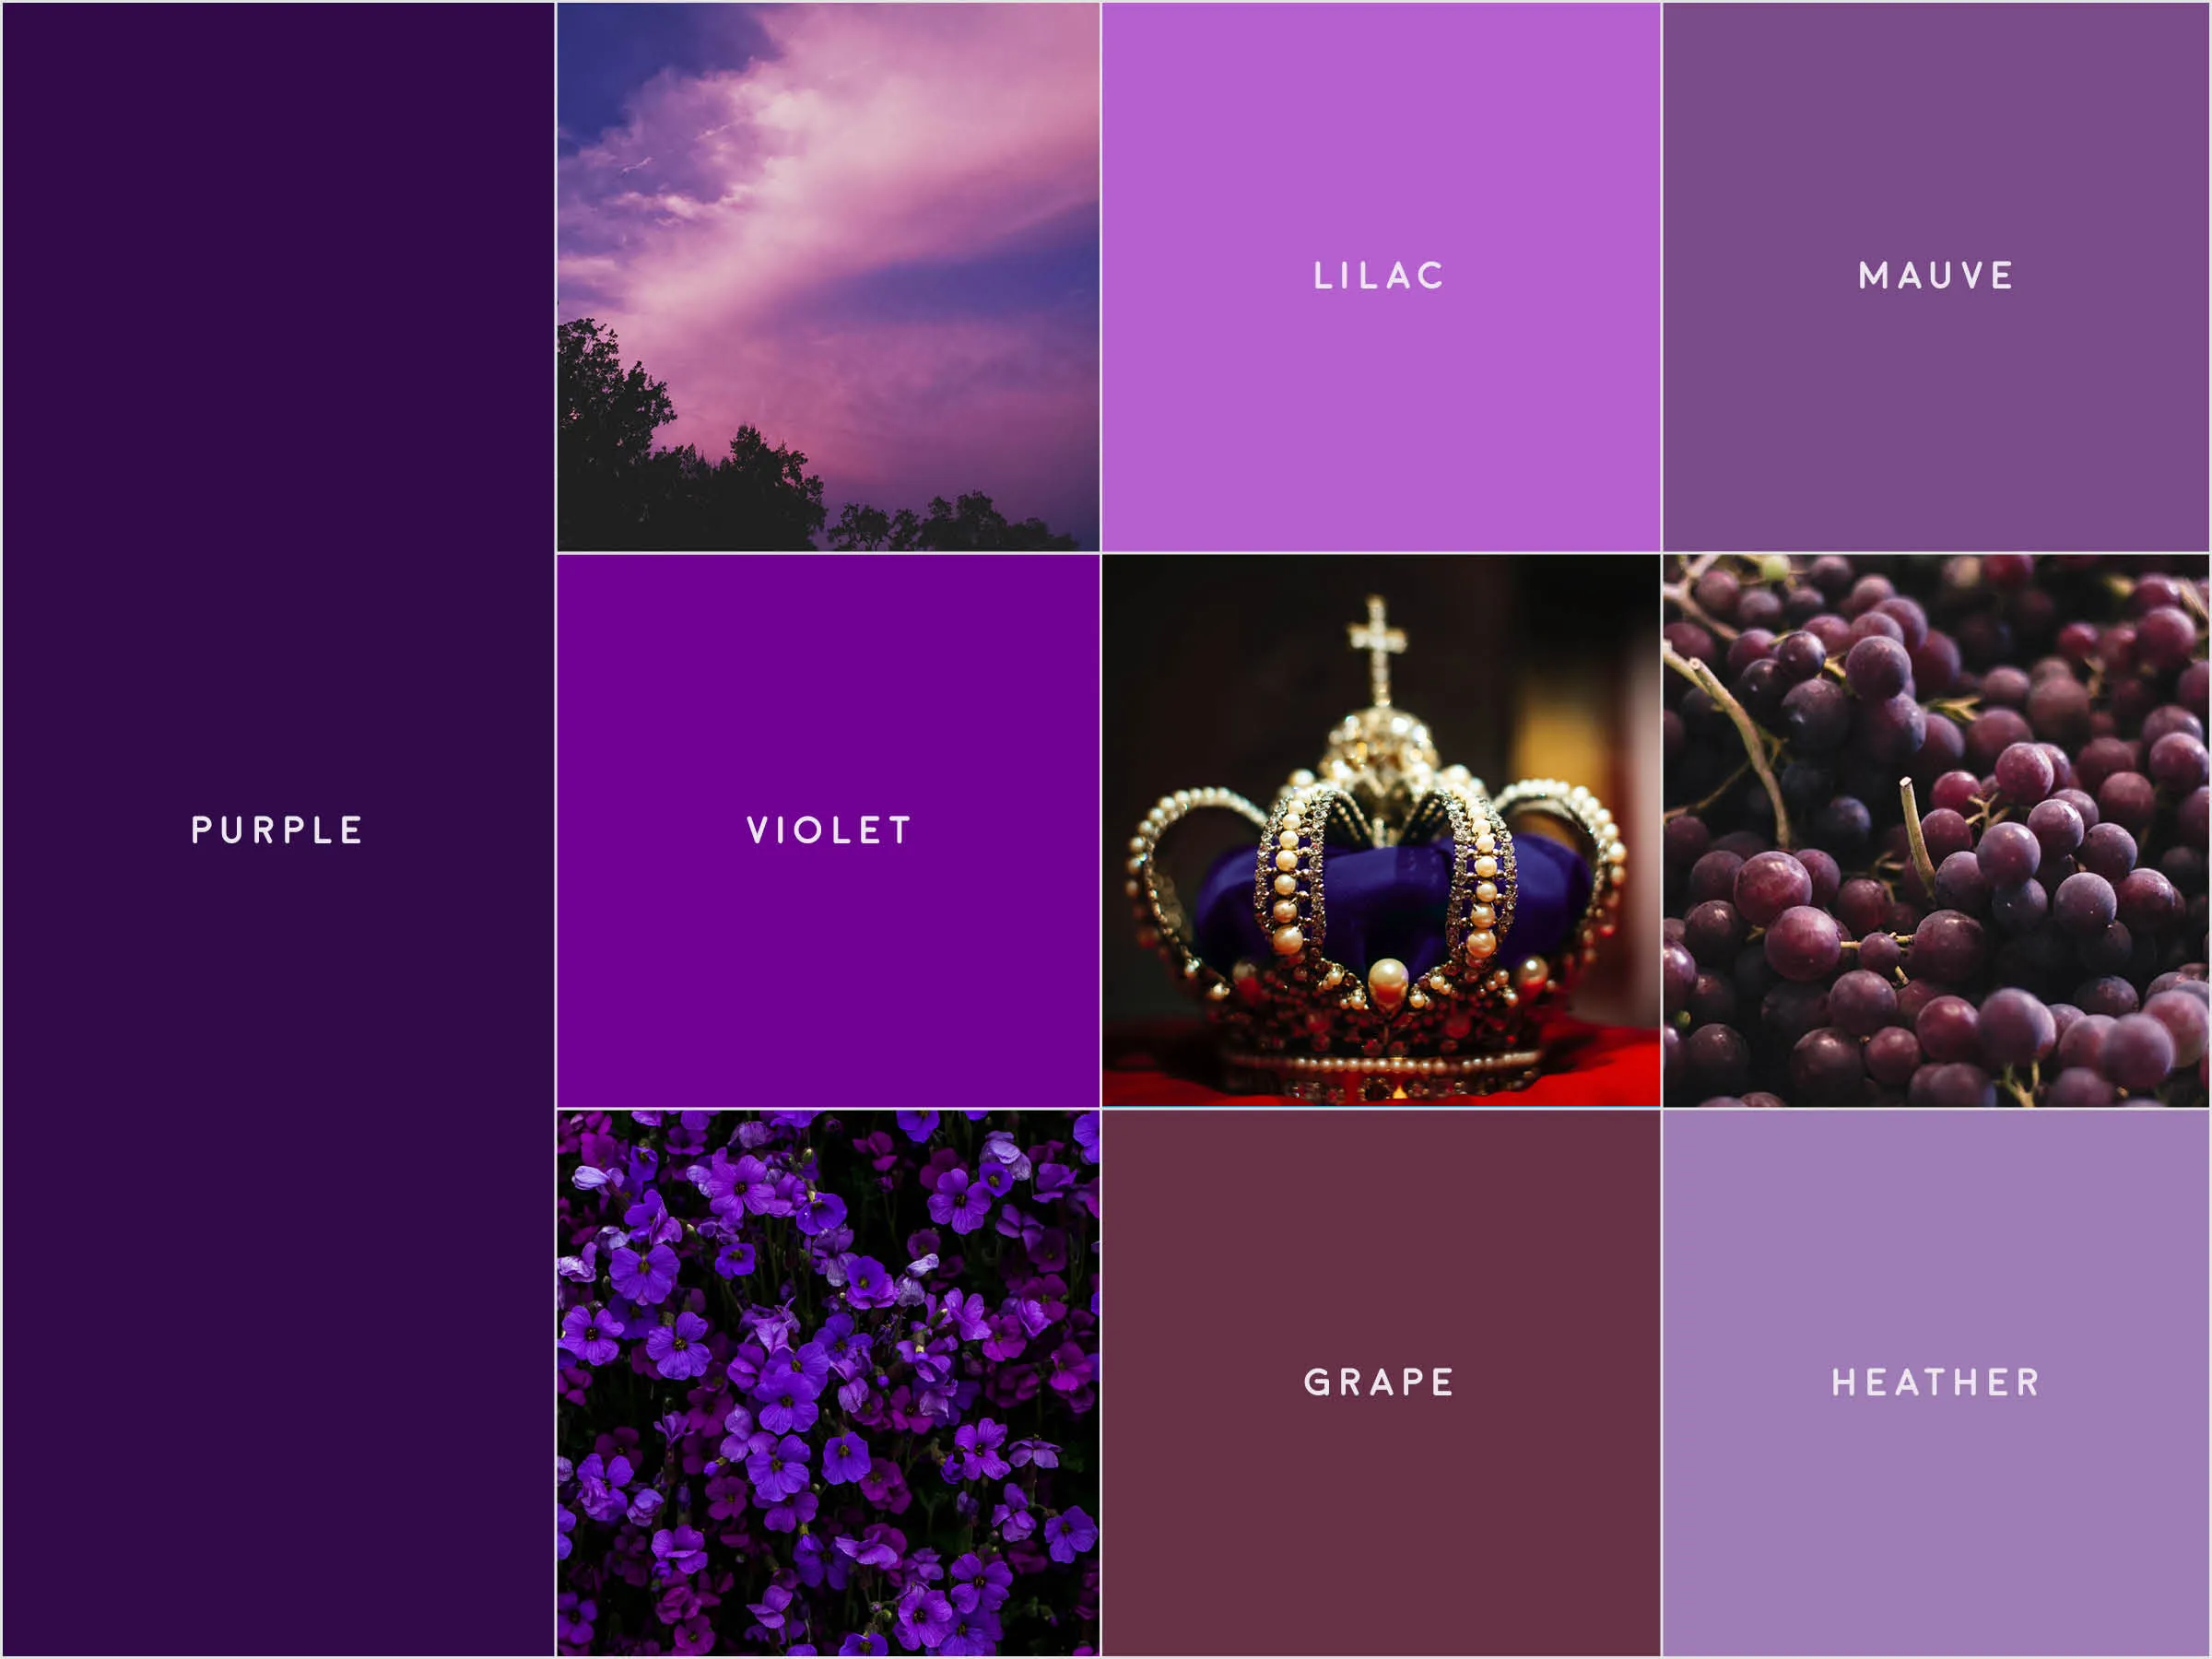 A gridded image with various tones of purple, and small photographs of a crown, flowers, grapes, and a sunset